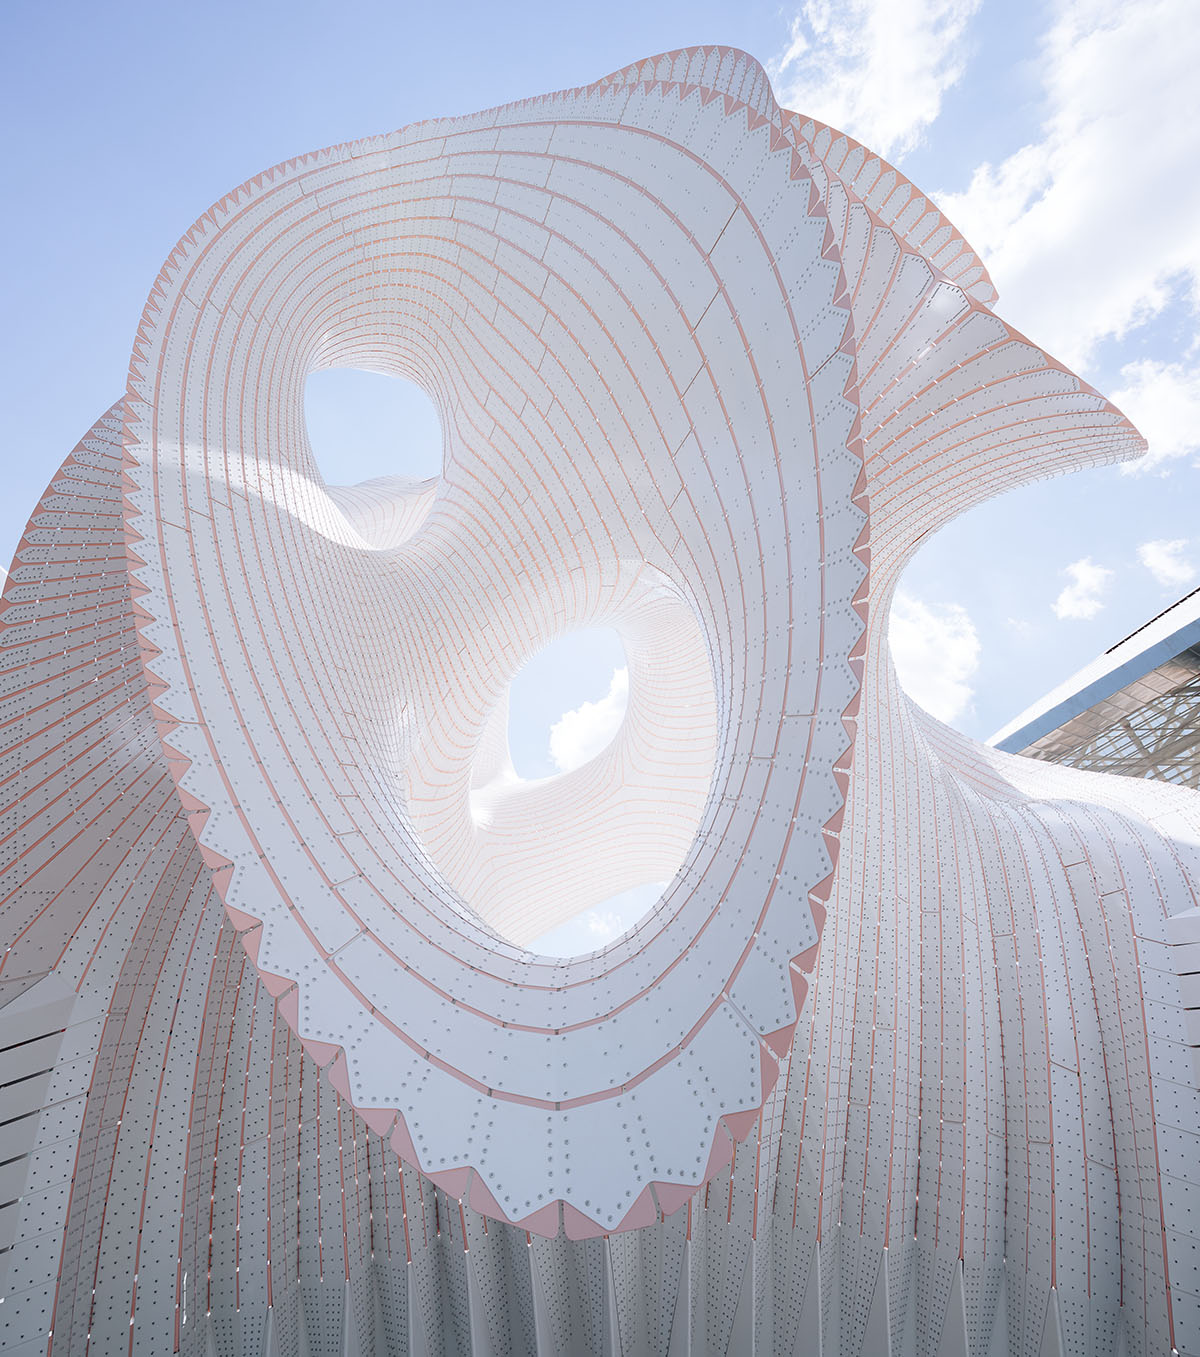 Marc Fornes created ultra-thin contorted installation for Astana's